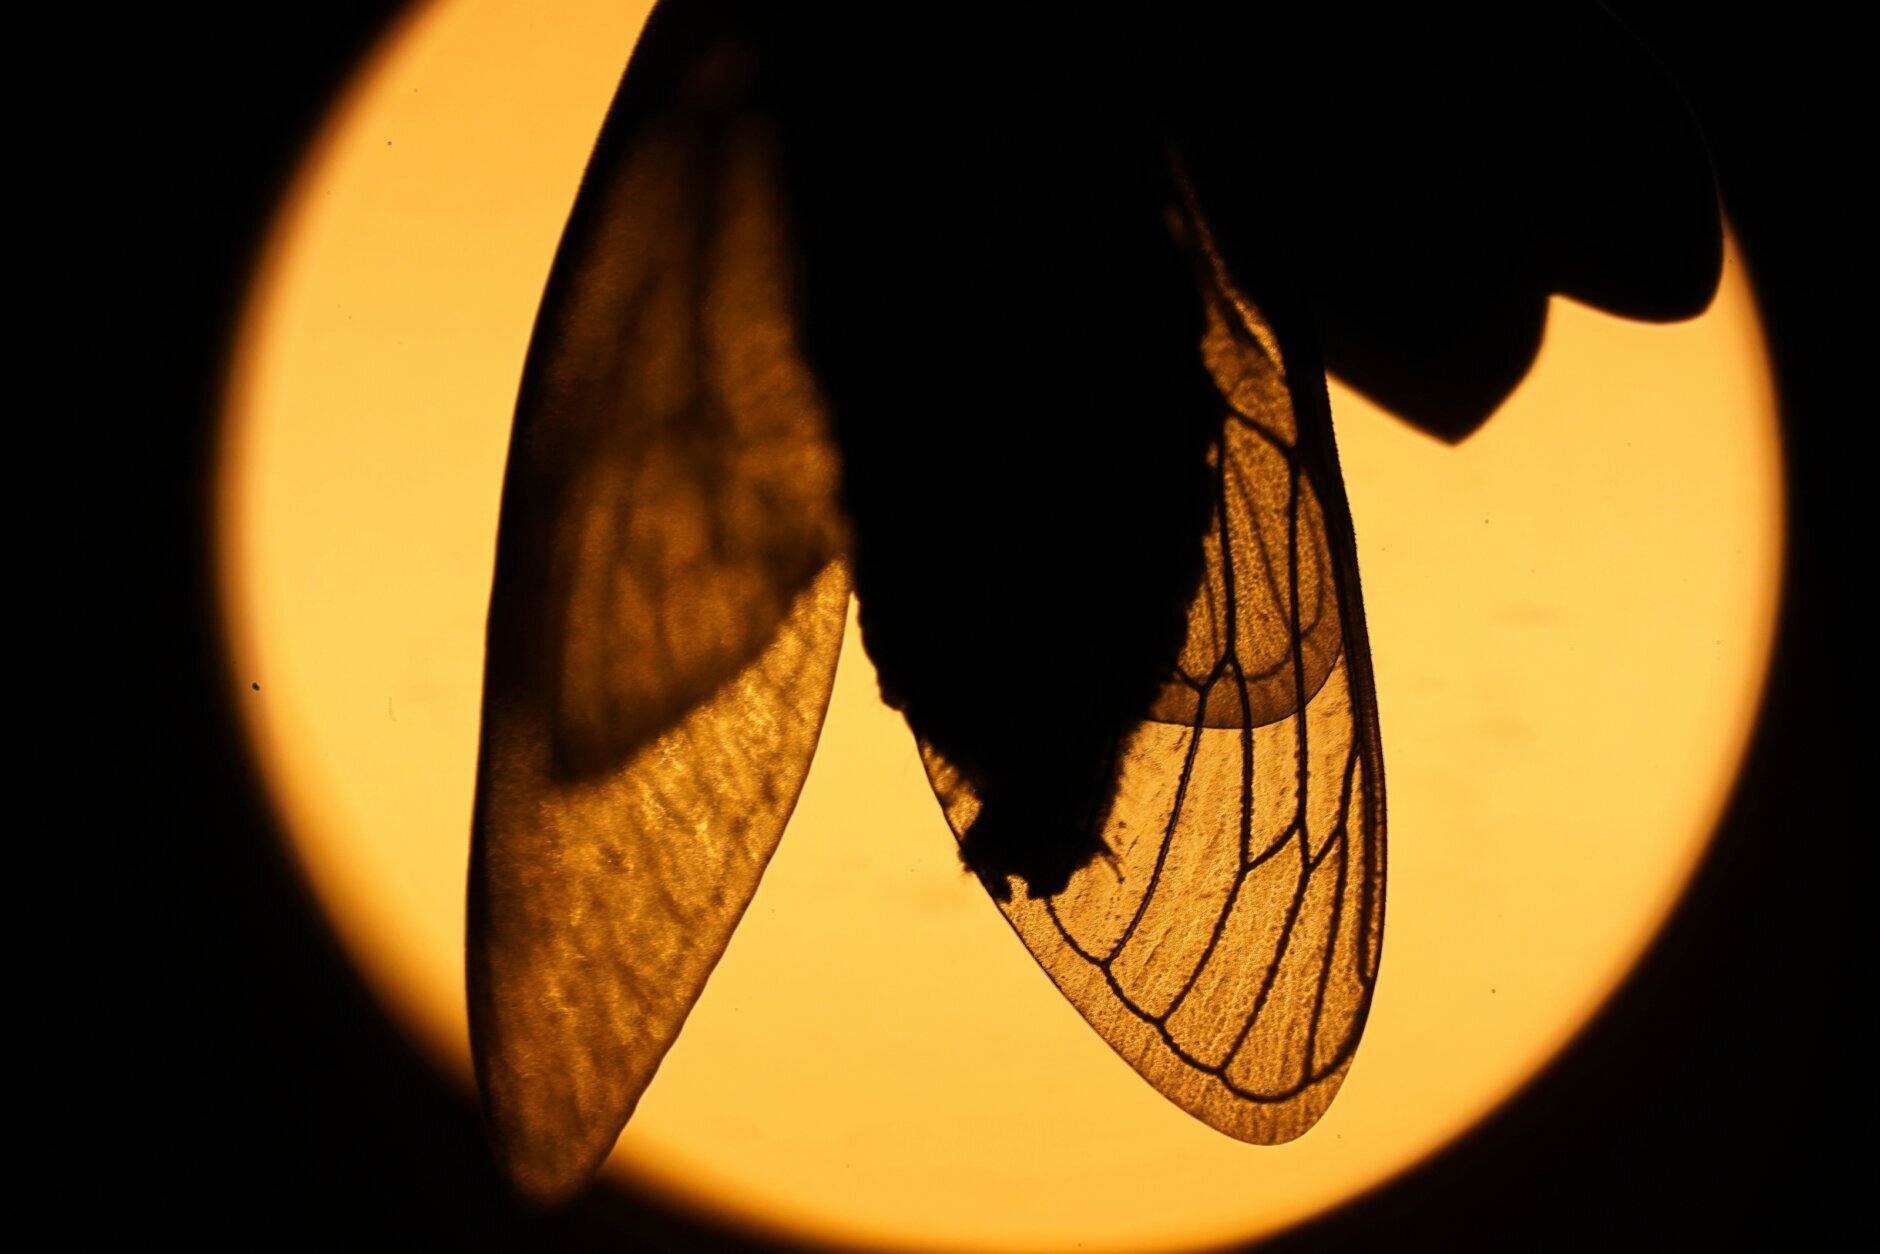 The wings of an adult cicada are silhouetted by a distant street light in Chevy Chase, Md., Thursday, May 13, 2021. (AP Photo/Carolyn Kaster)